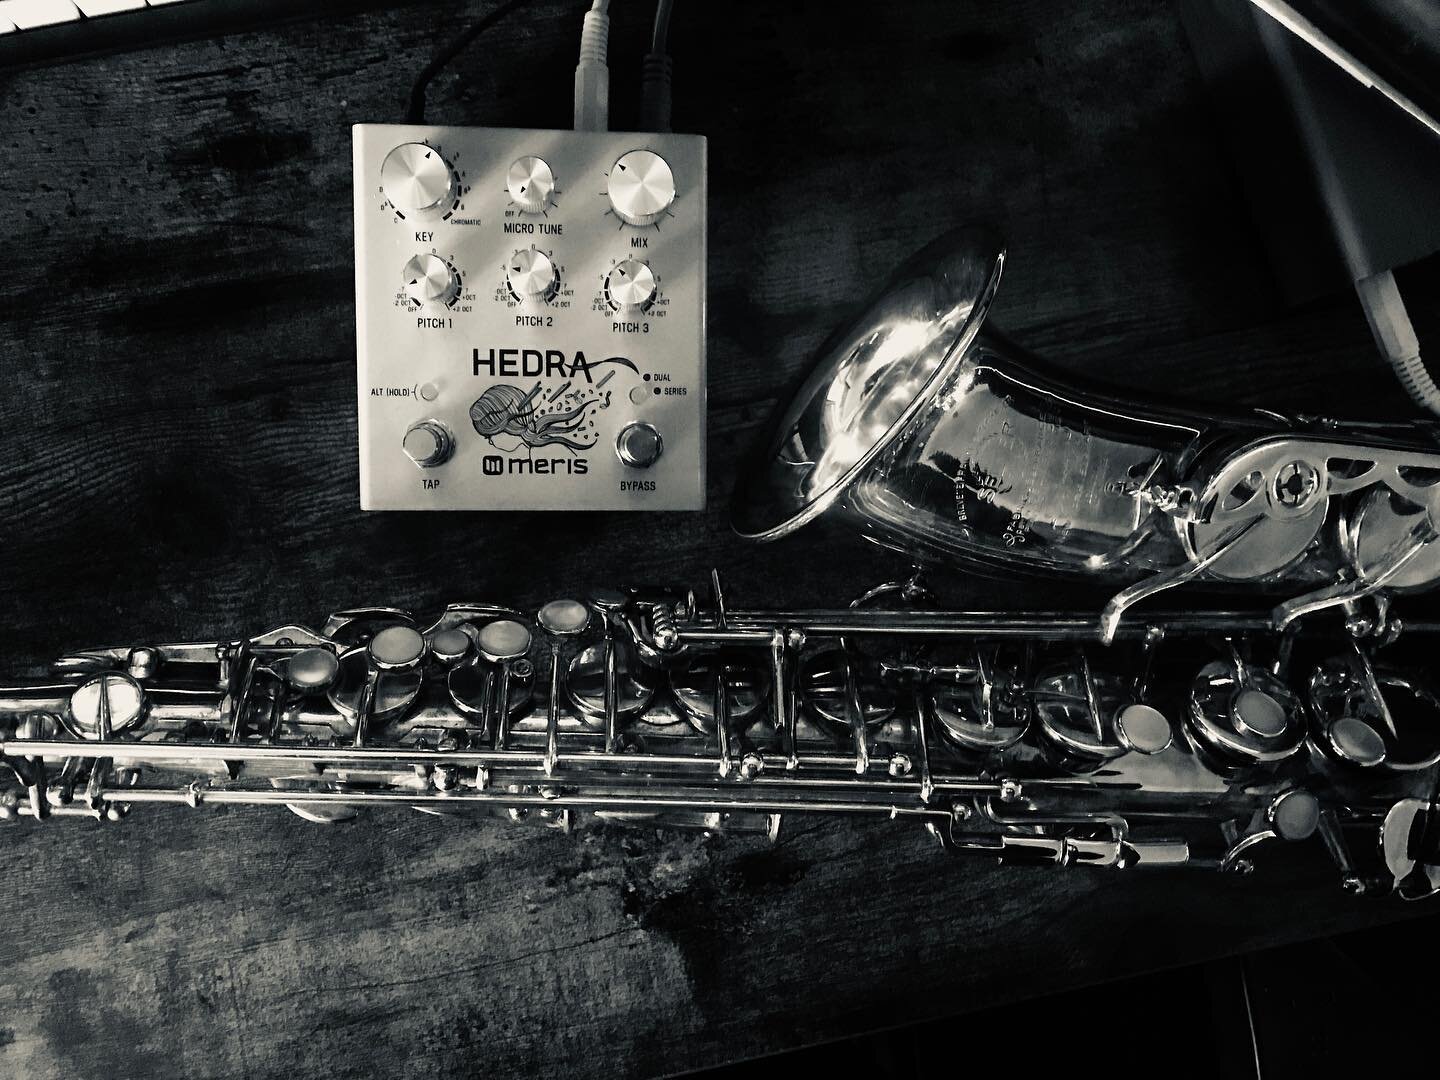 Head to my website to check out some sounds using the Meris Hedra pedal and saxophone in my latest bit of scoring practice (link in bio) 
&bull;
&bull;
&bull;
@meris.us @henriselmerparis #newmusic #scoringpractice #thering #horror #pedal #meris #meri